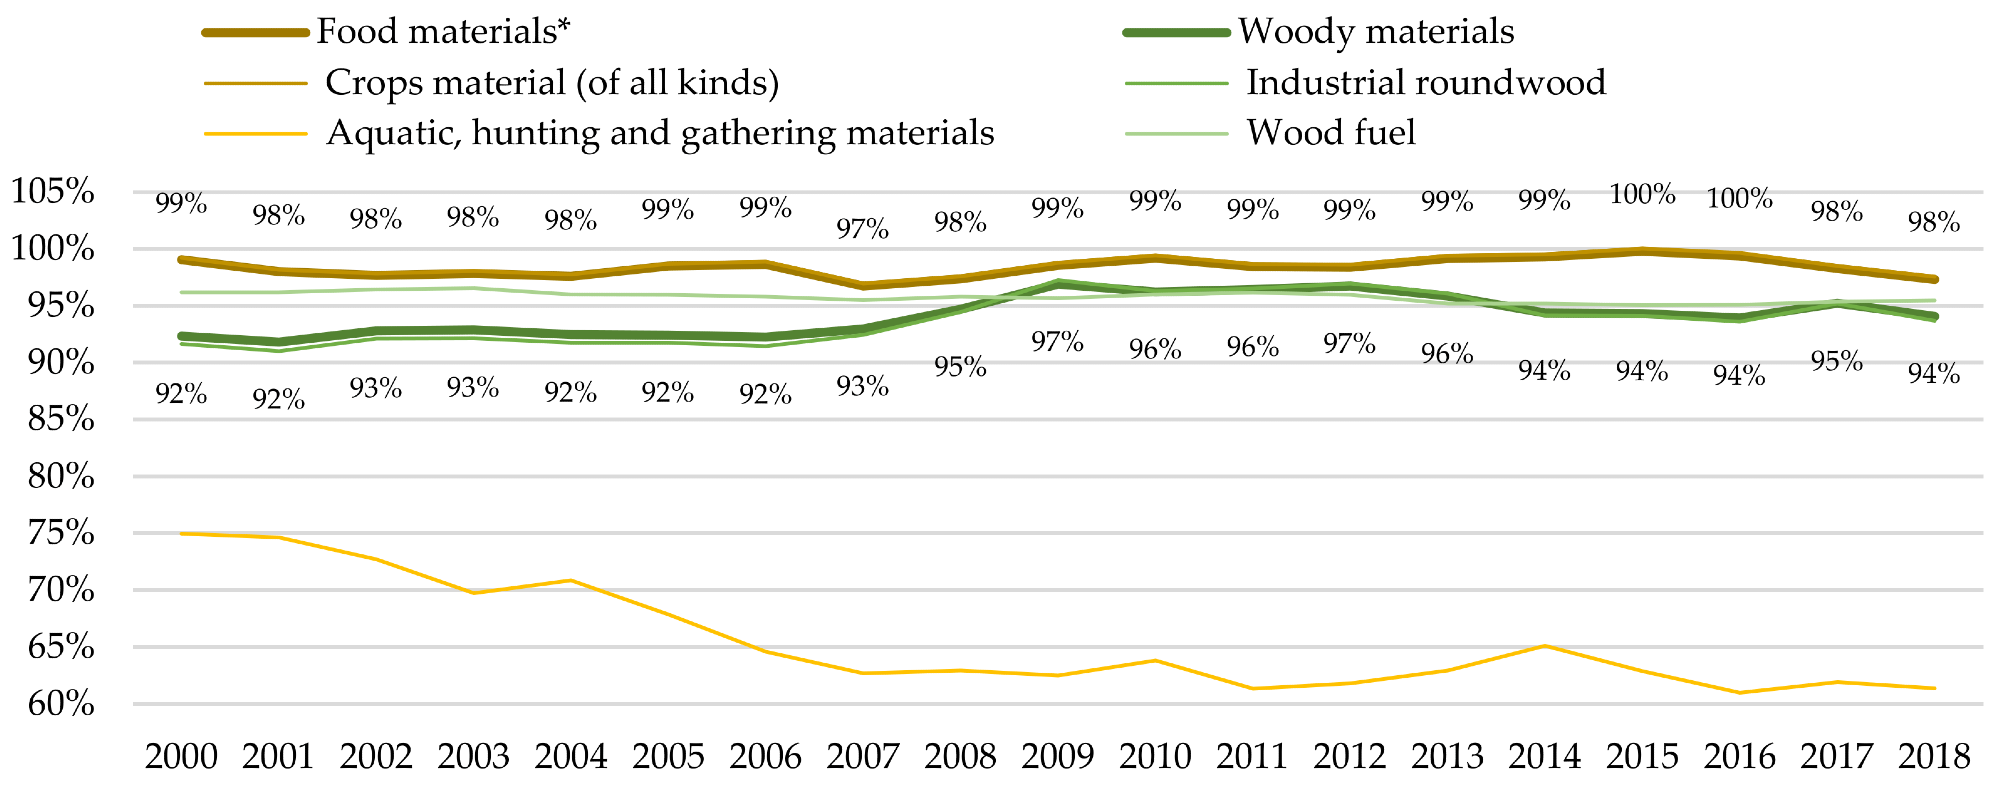 Trends of the self-sufficiency in biomass groups and sub-groups in the EU-28. Notes: * including small amounts of non-edible biomass; SSR value presented by food and woody materials groups. Source: Own composition based on the material flow accounts data from the Eurostat database